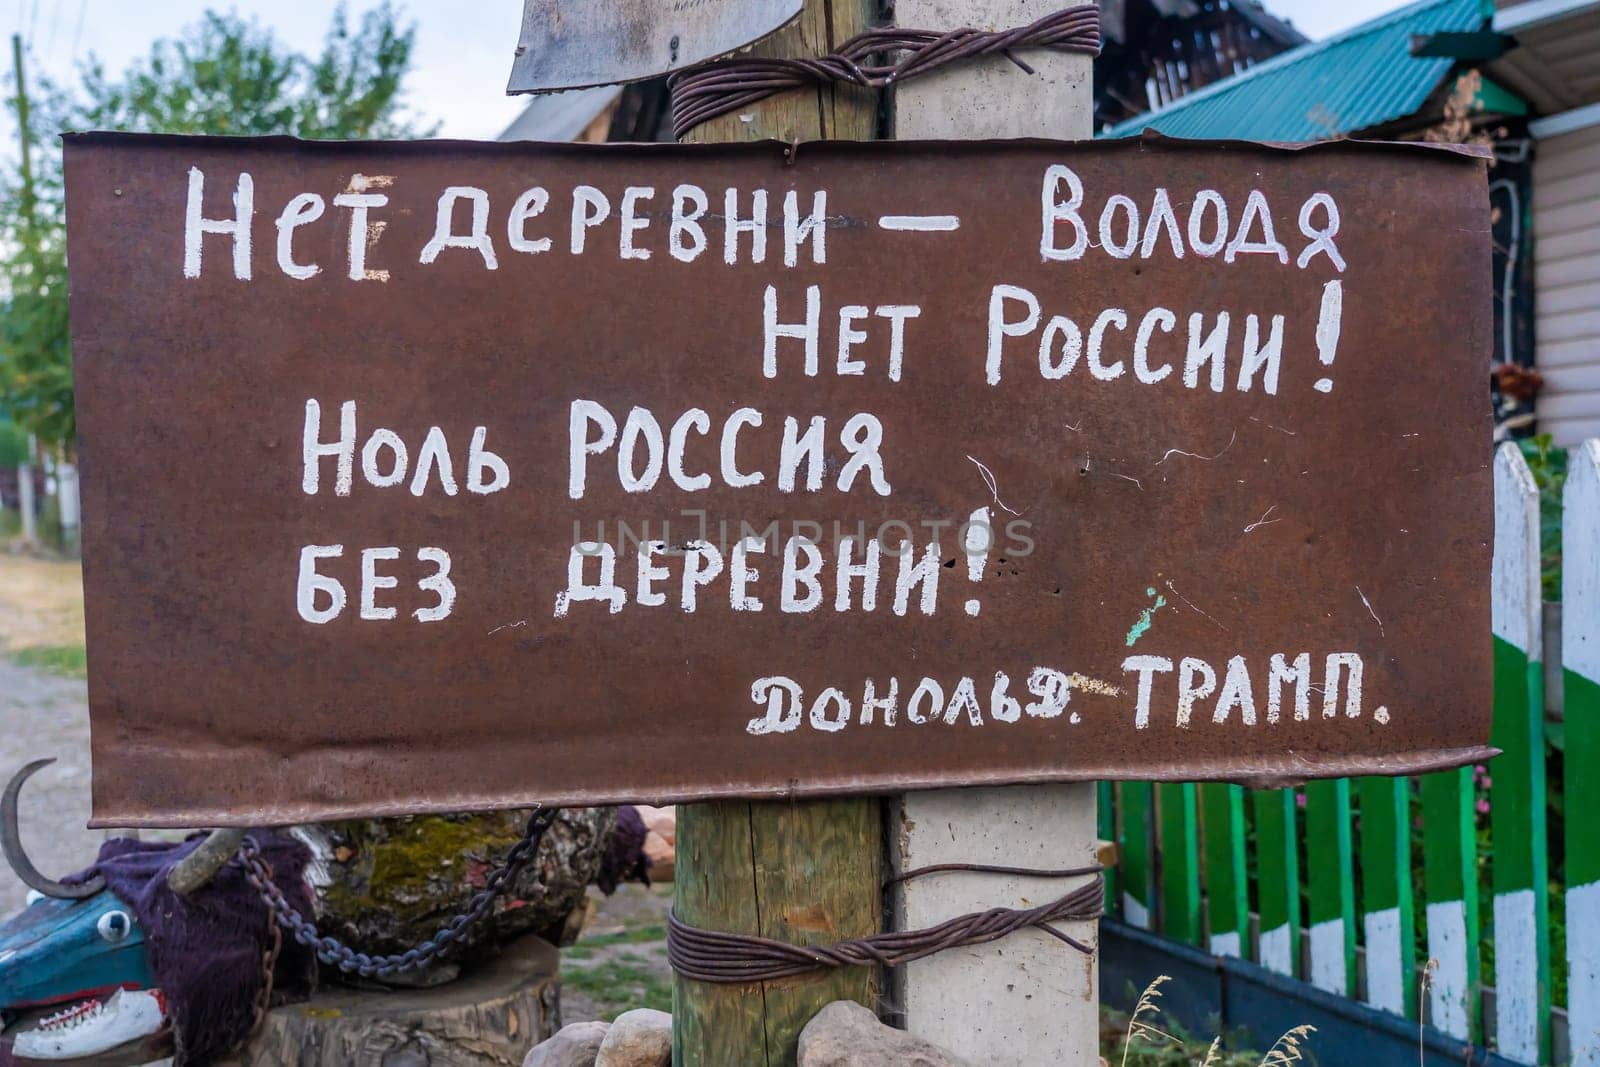 Russian funny and humorous inscriptions in the village of Tyulyuk in the South Urals.